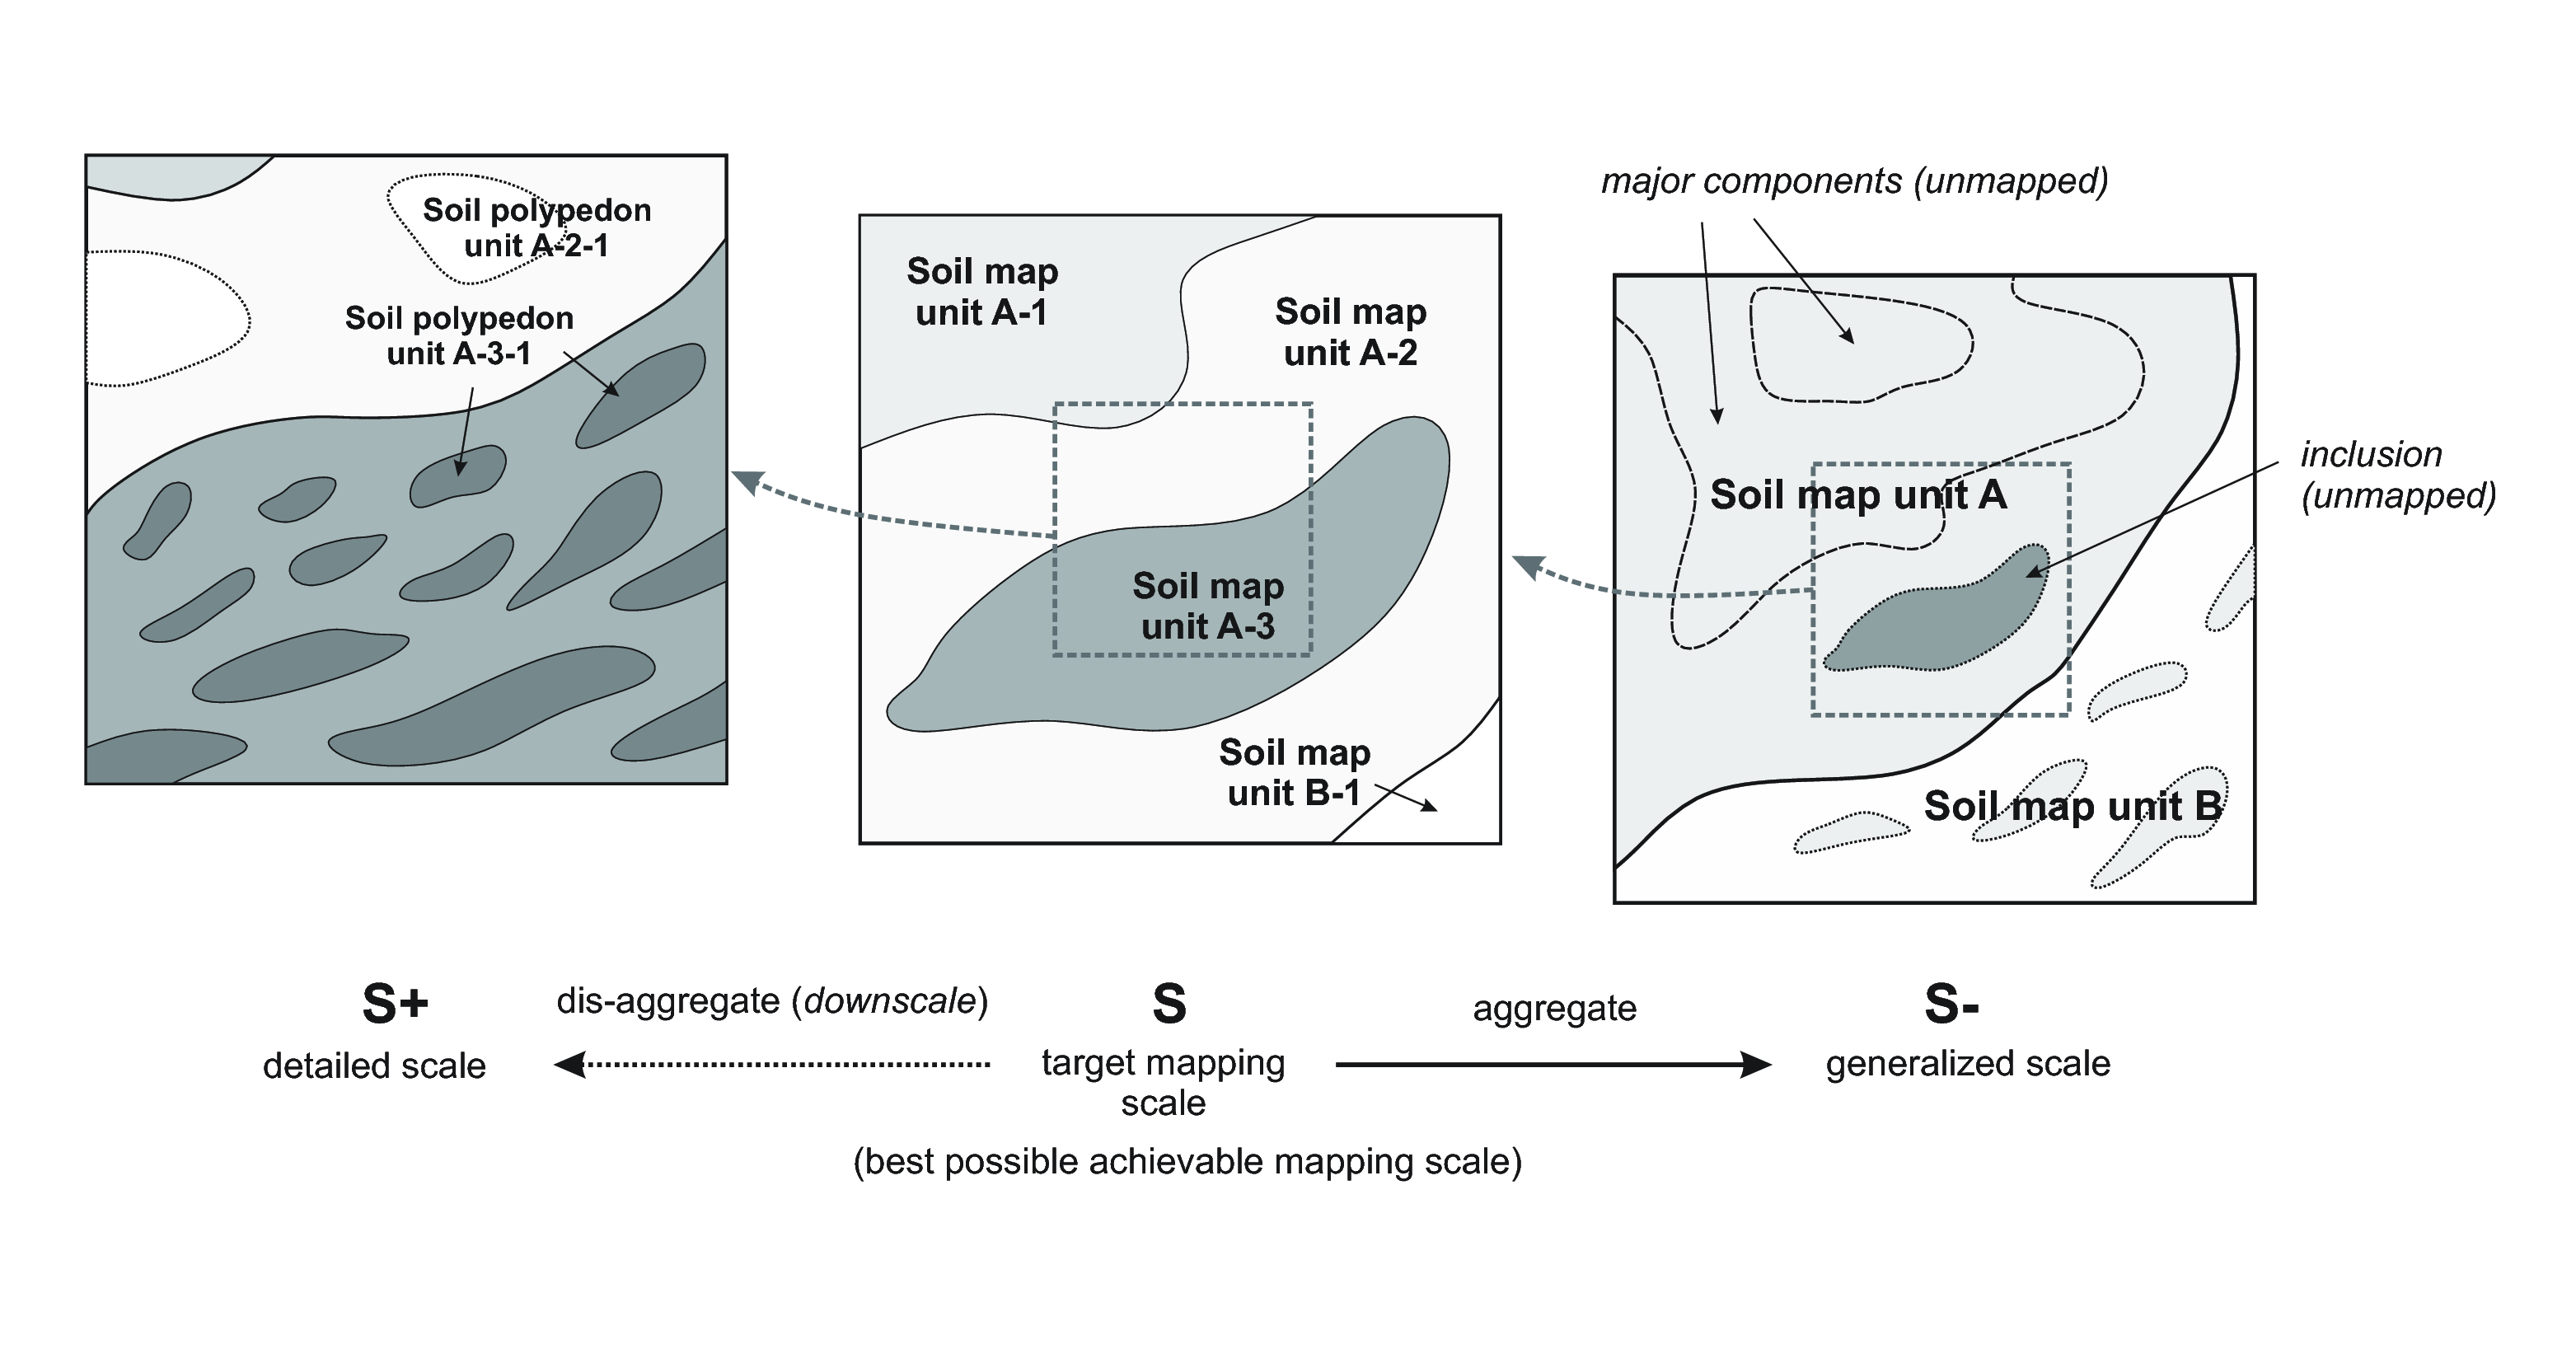 Three basic conceptual scales in soil mapping: (left) most detailed scale showing the actual distribution of soil bodies, (center) target scale i.e. scale achievable by the soil survey budget, (right) generalized intermediate scale or coarse resolution maps. In a conventional soil survey, soils are described and conceptualized as groups of similar pedons (smallest elements of 1–10 square-m), called “polypedons” — the smallest mappable entity. These can then be further generalized to soil map units, which can be various combinations (systematic or random) of dominant and contrasting soils (inclusions).